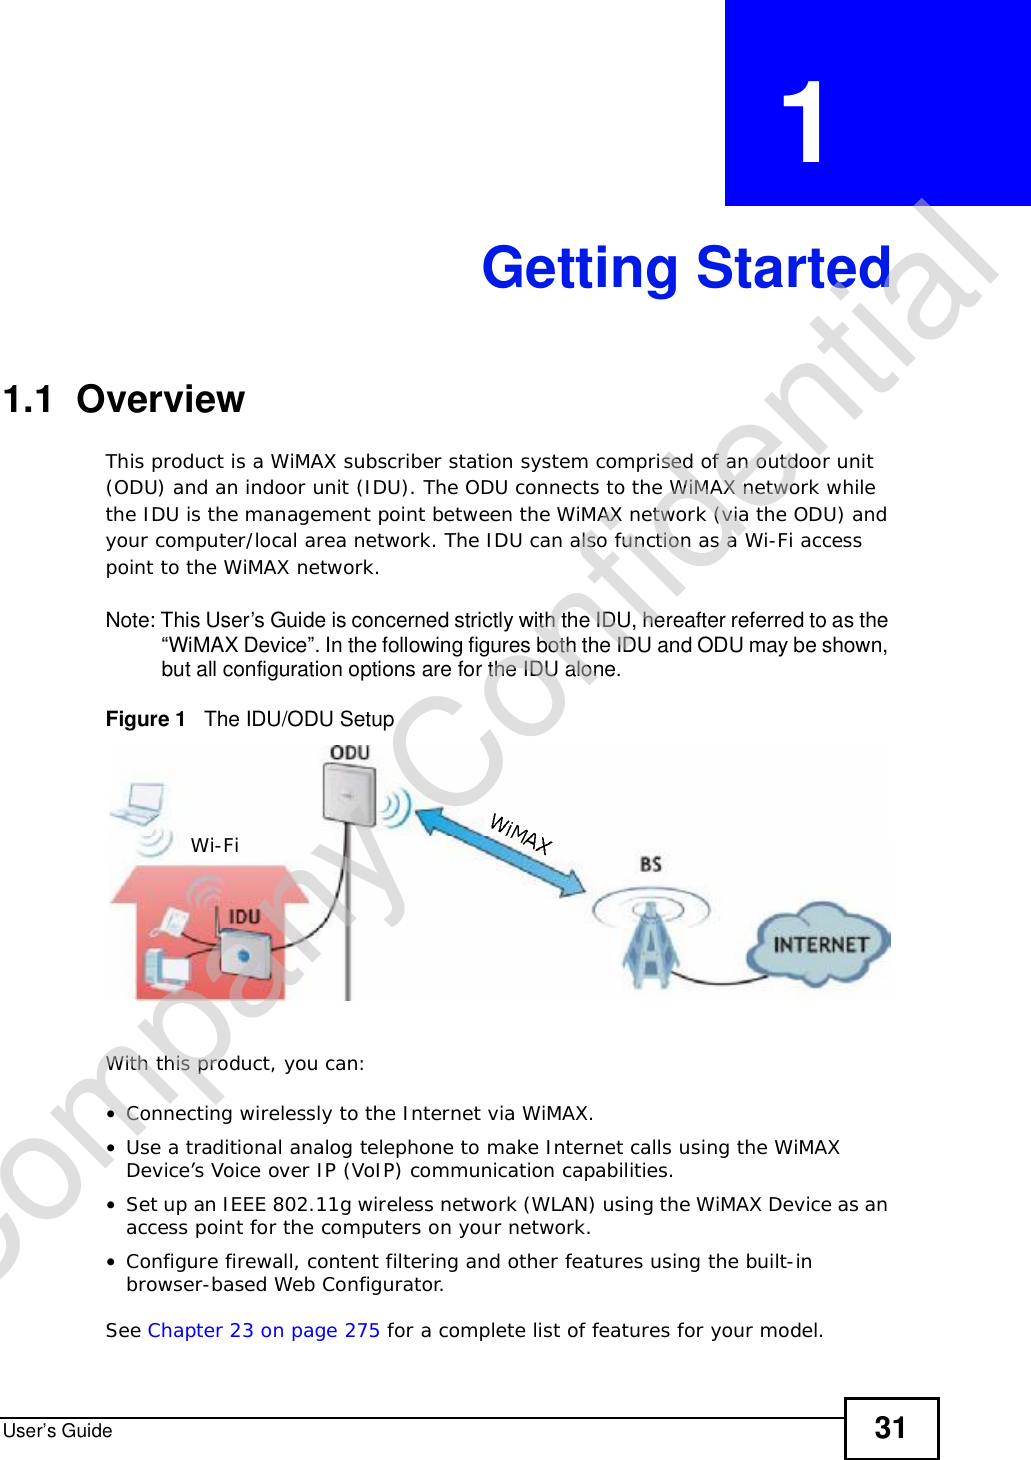 User’s Guide 31CHAPTER  1 Getting Started1.1  OverviewThis product is a WiMAX subscriber station system comprised of an outdoor unit (ODU) and an indoor unit (IDU). The ODU connects to the WiMAX network while the IDU is the management point between the WiMAX network (via the ODU) and your computer/local area network. The IDU can also function as a Wi-Fi access point to the WiMAX network. Note: This User’s Guide is concerned strictly with the IDU, hereafter referred to as the “WiMAX Device”. In the following figures both the IDU and ODU may be shown, but all configuration options are for the IDU alone.Figure 1   The IDU/ODU SetupWith this product, you can:•Connecting wirelessly to the Internet via WiMAX.•Use a traditional analog telephone to make Internet calls using the WiMAX Device’s Voice over IP (VoIP) communication capabilities. •Set up an IEEE 802.11g wireless network (WLAN) using the WiMAX Device as an access point for the computers on your network.•Configure firewall, content filtering and other features using the built-in browser-based Web Configurator.See Chapter 23 on page 275 for a complete list of features for your model.Wi-FiCompany Confidential